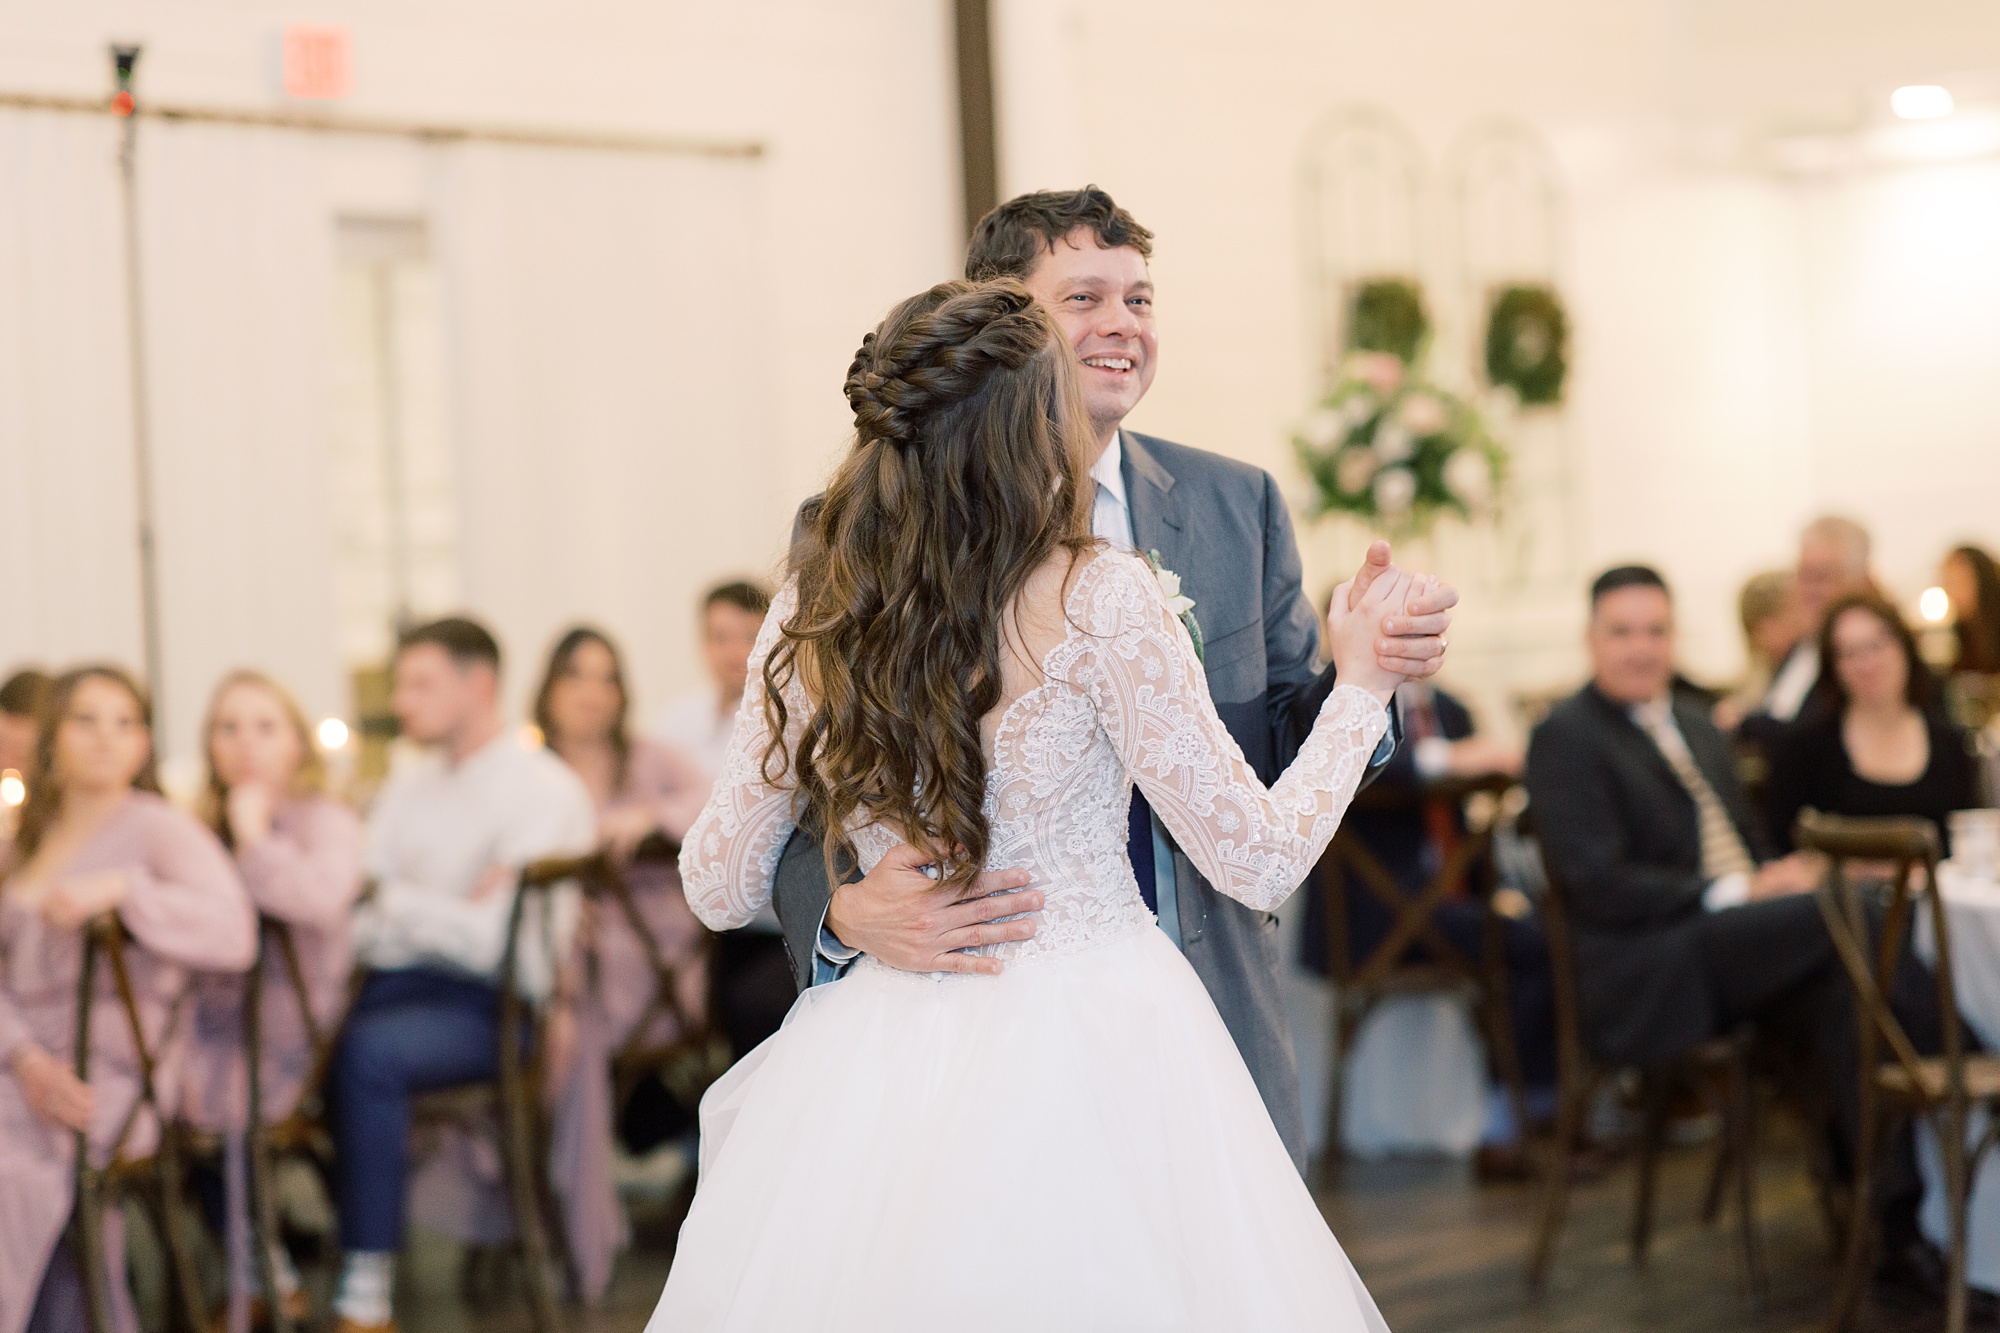 father-daughter dance at HighPointe Estate wedding reception